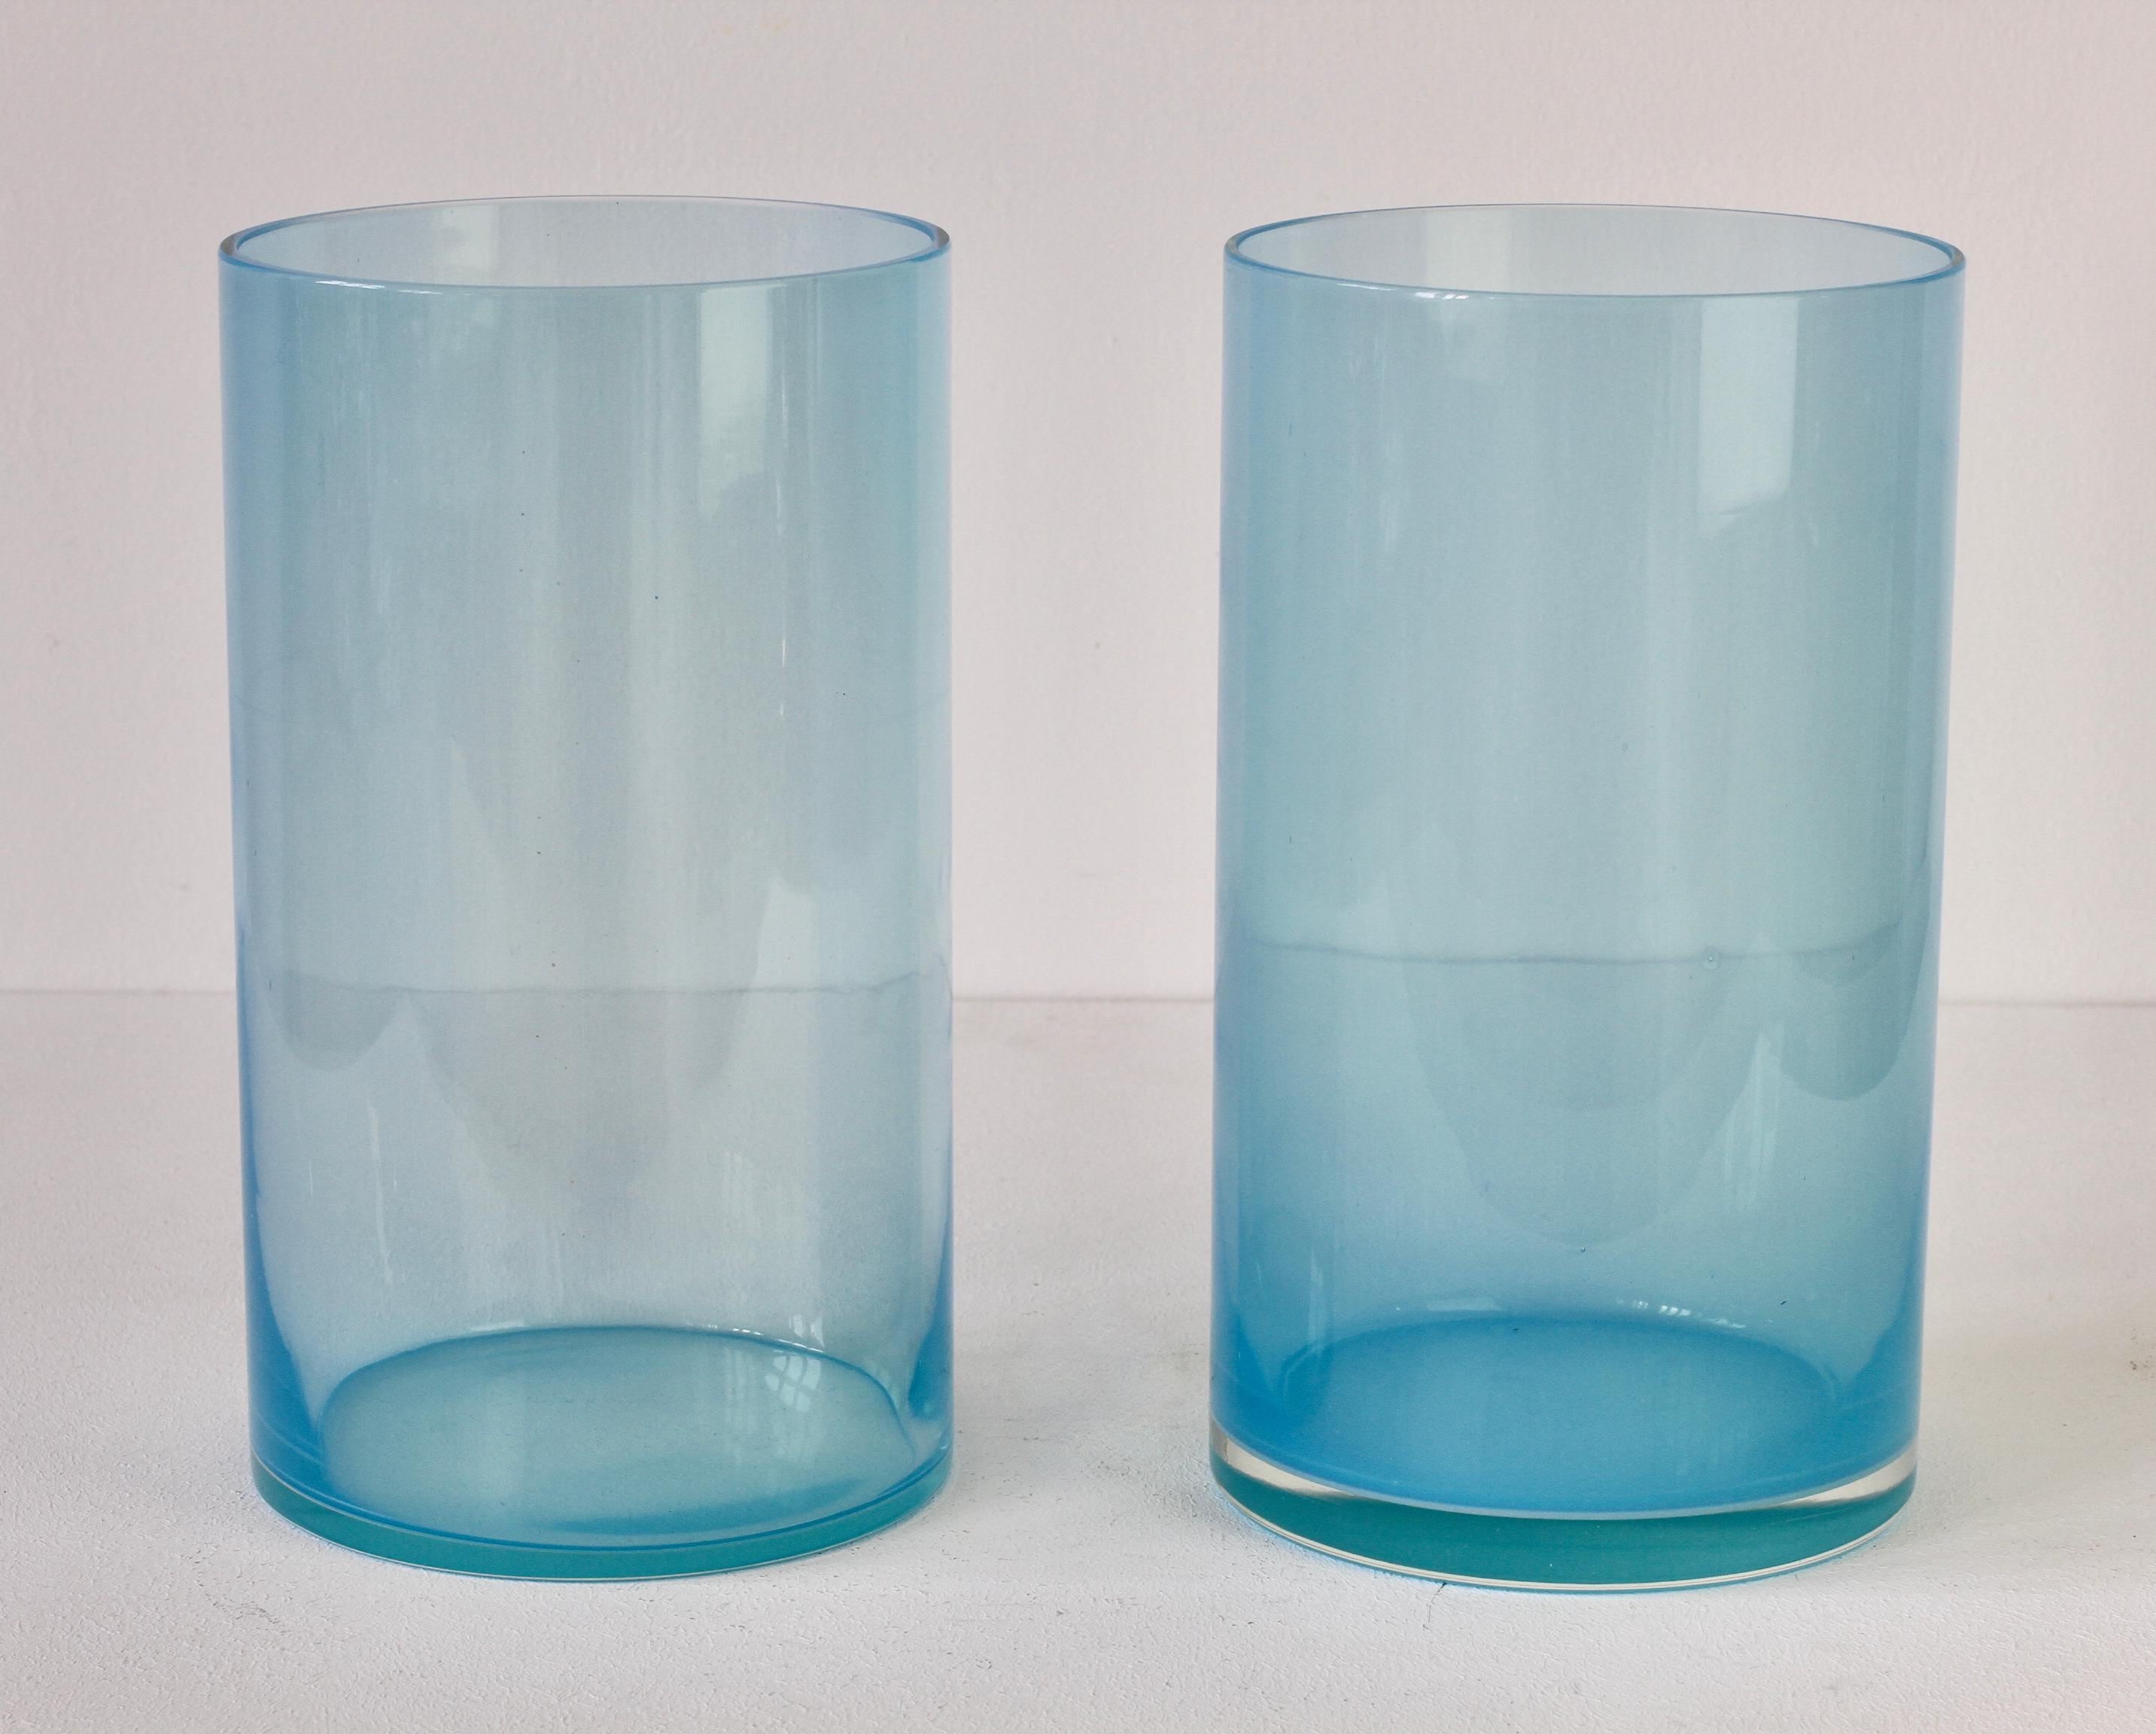 Italian Signed Pair of Antonio da Ros for Cenedese Vibrantly Colored Murano Glass Vases